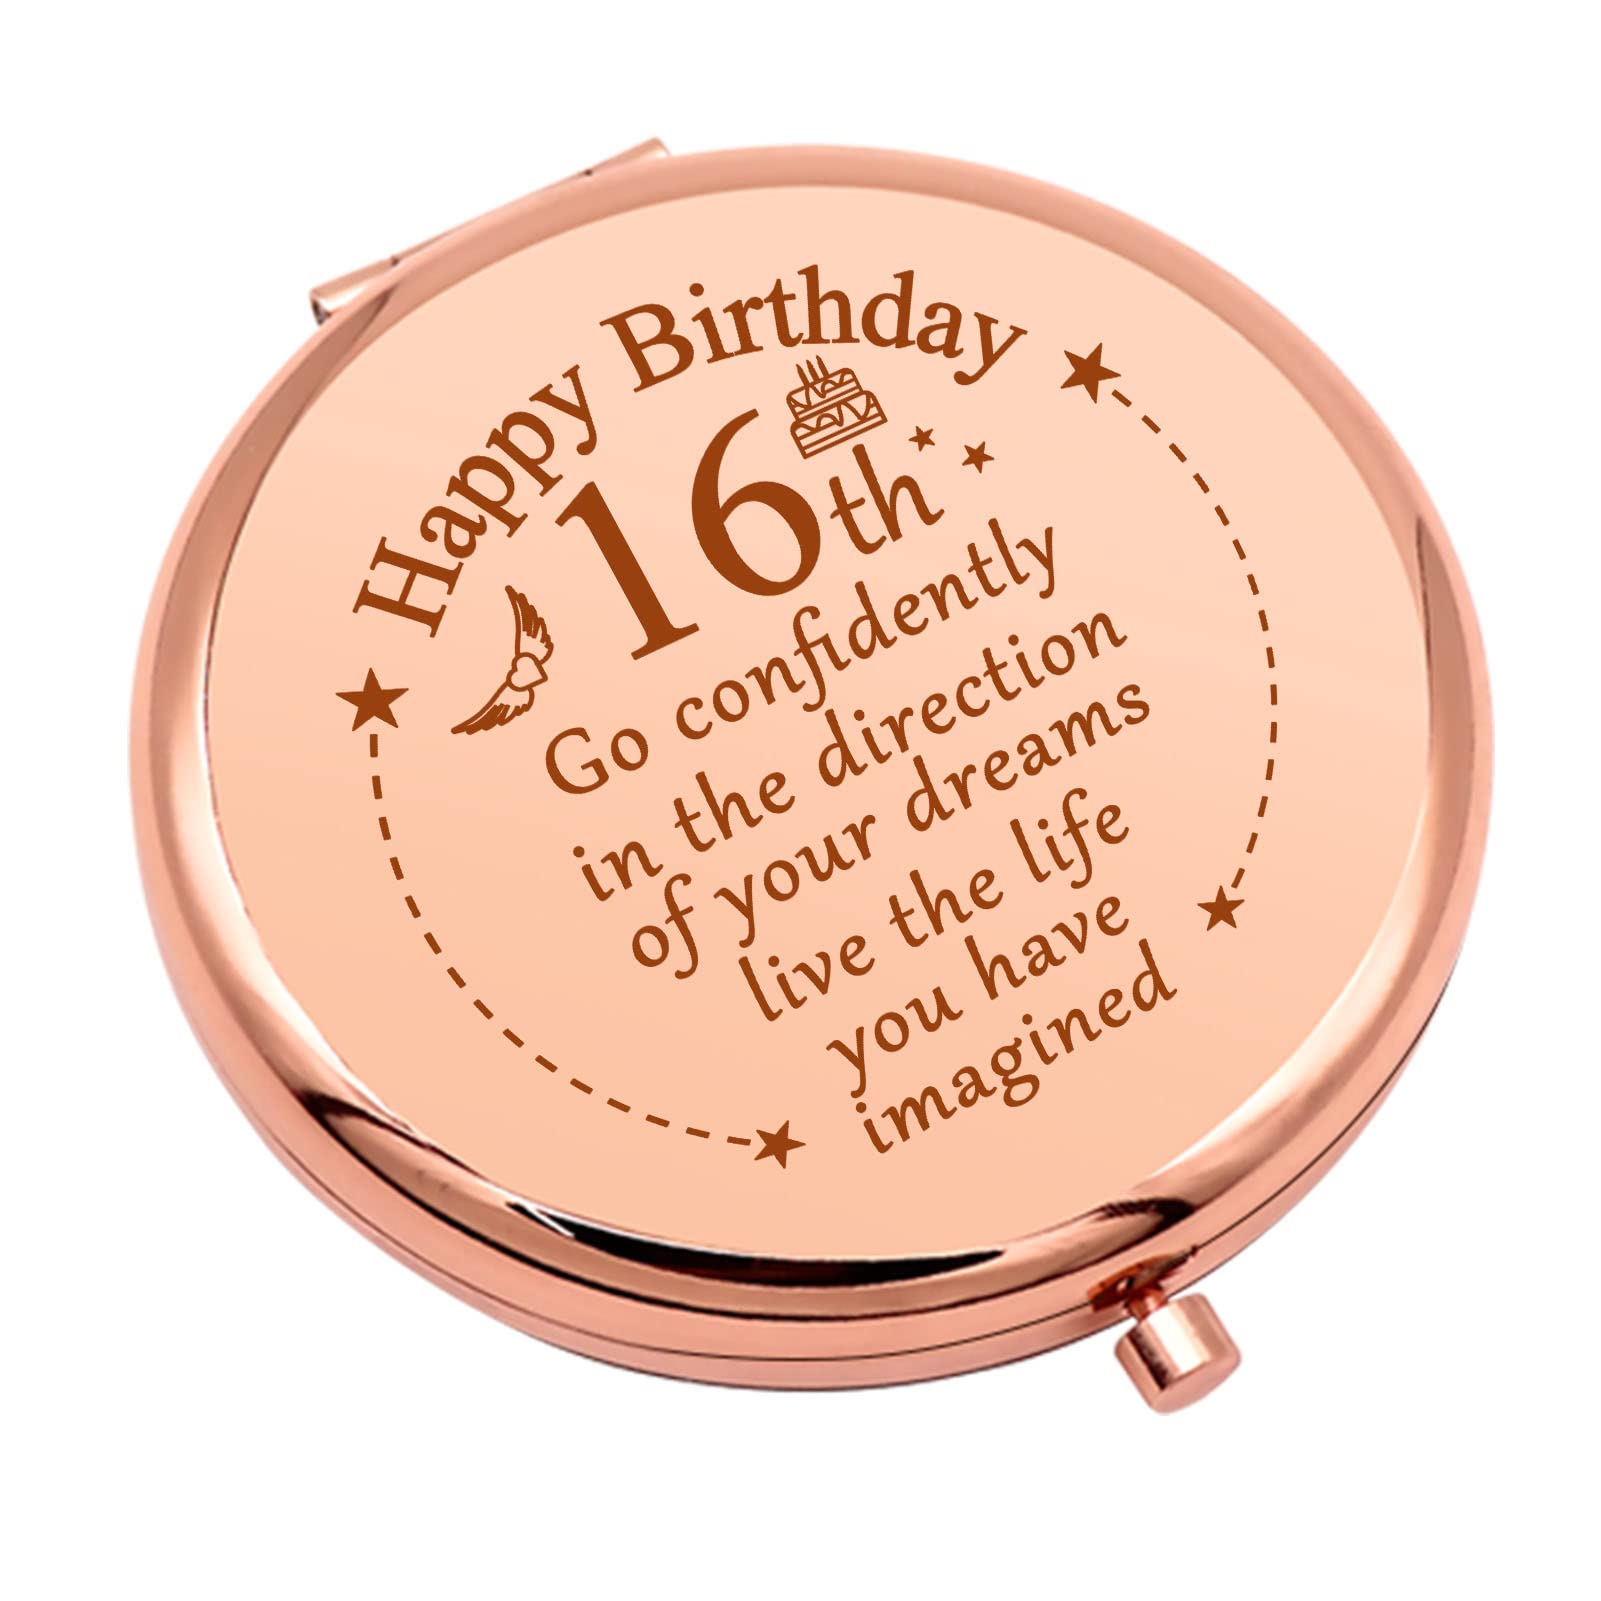 16 Year Anniversary Gift for Wife, 16 Year Anniversary Gifts, 16 Year  Wedding Anniversary Gift Ideas, 16th Anniversary Gift for Her 